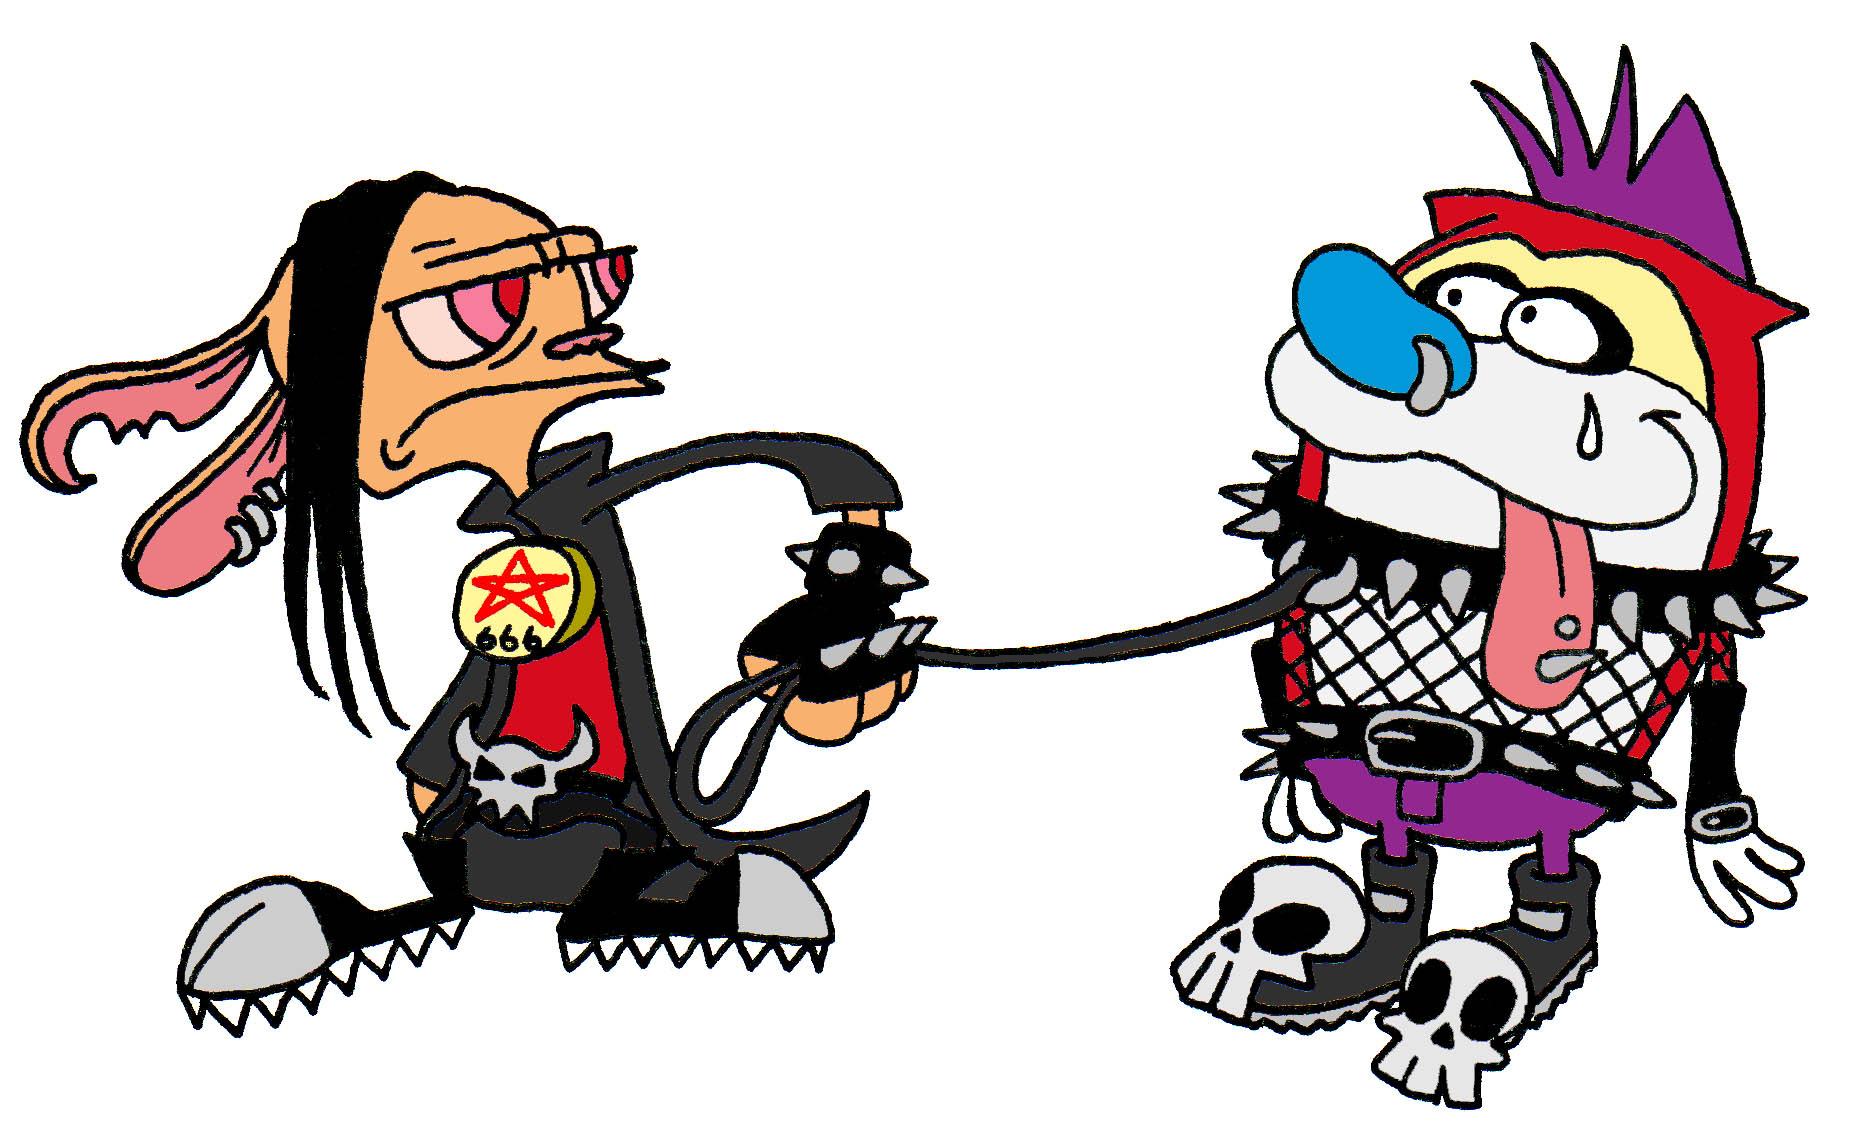 Ren & Stimpy as gothics (in color) by antihero